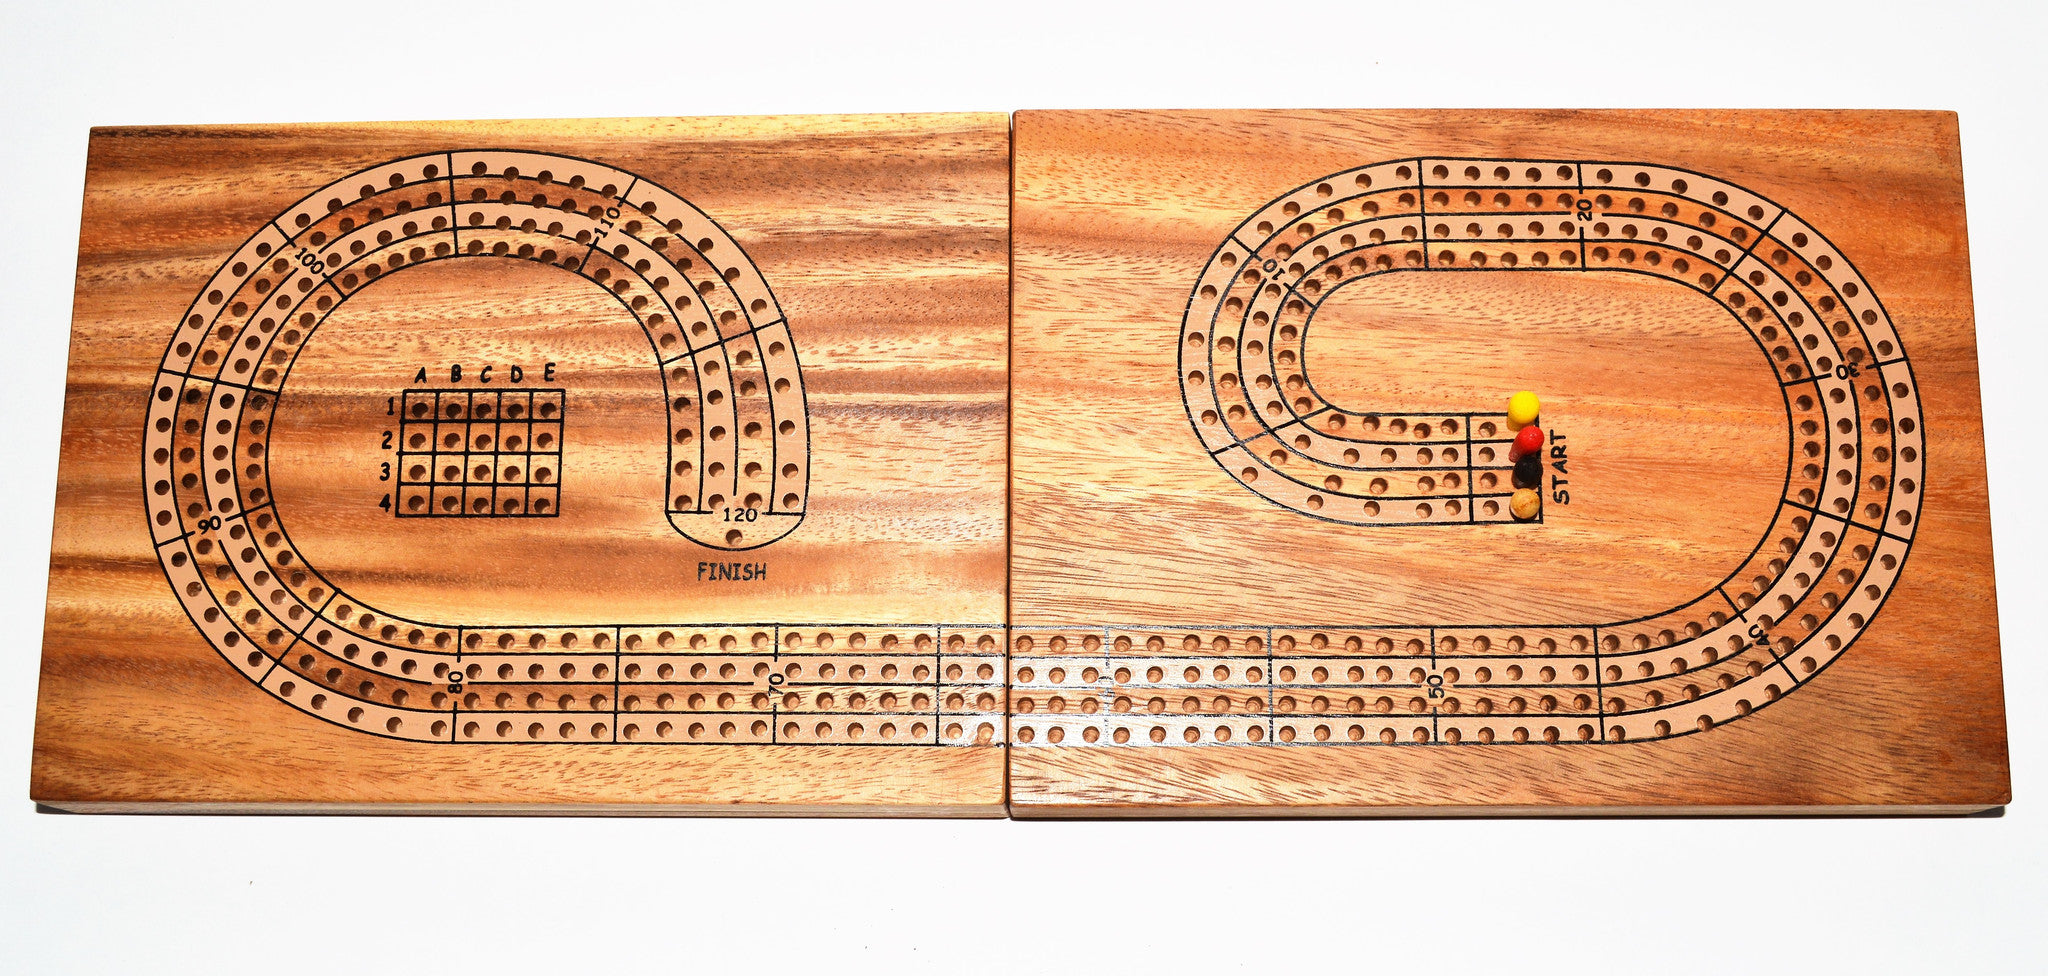 Cribbage Board 4 players - Wooden Game - Solve It! Think Out of the Box